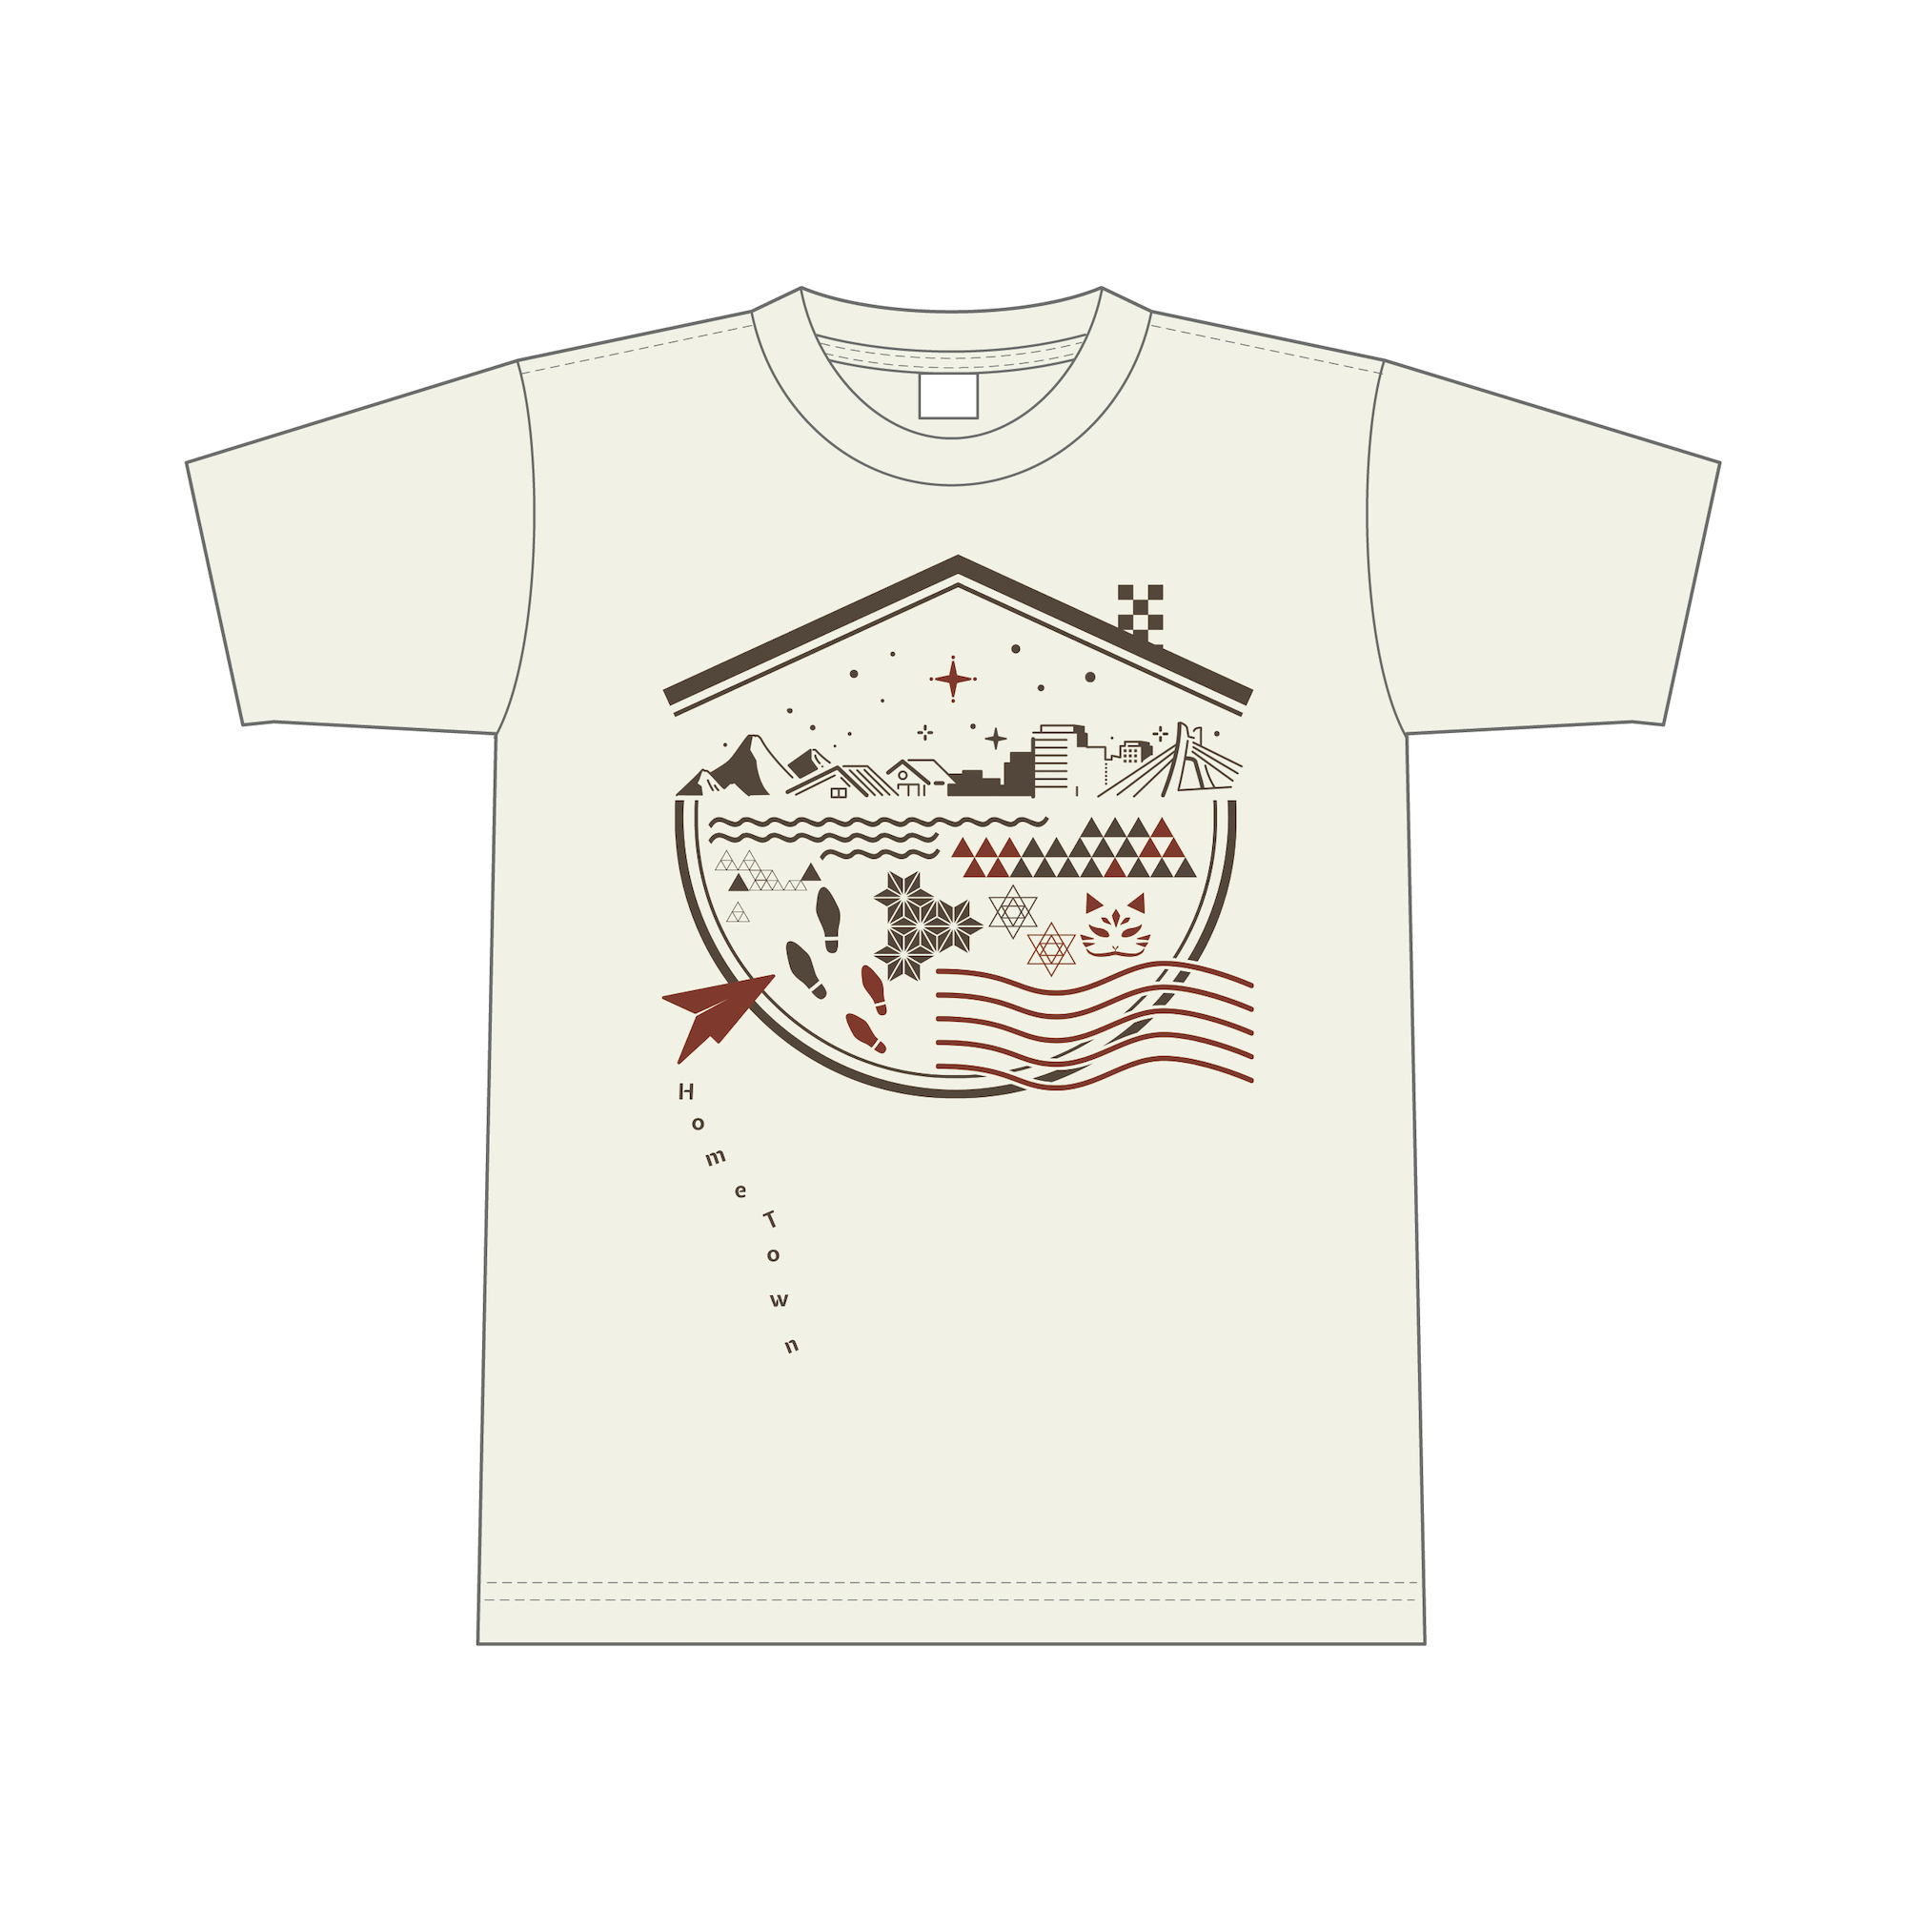 【Home Town会員限定】君住む街へ　Tシャツ　～Home Town ver～（予約販売商品）